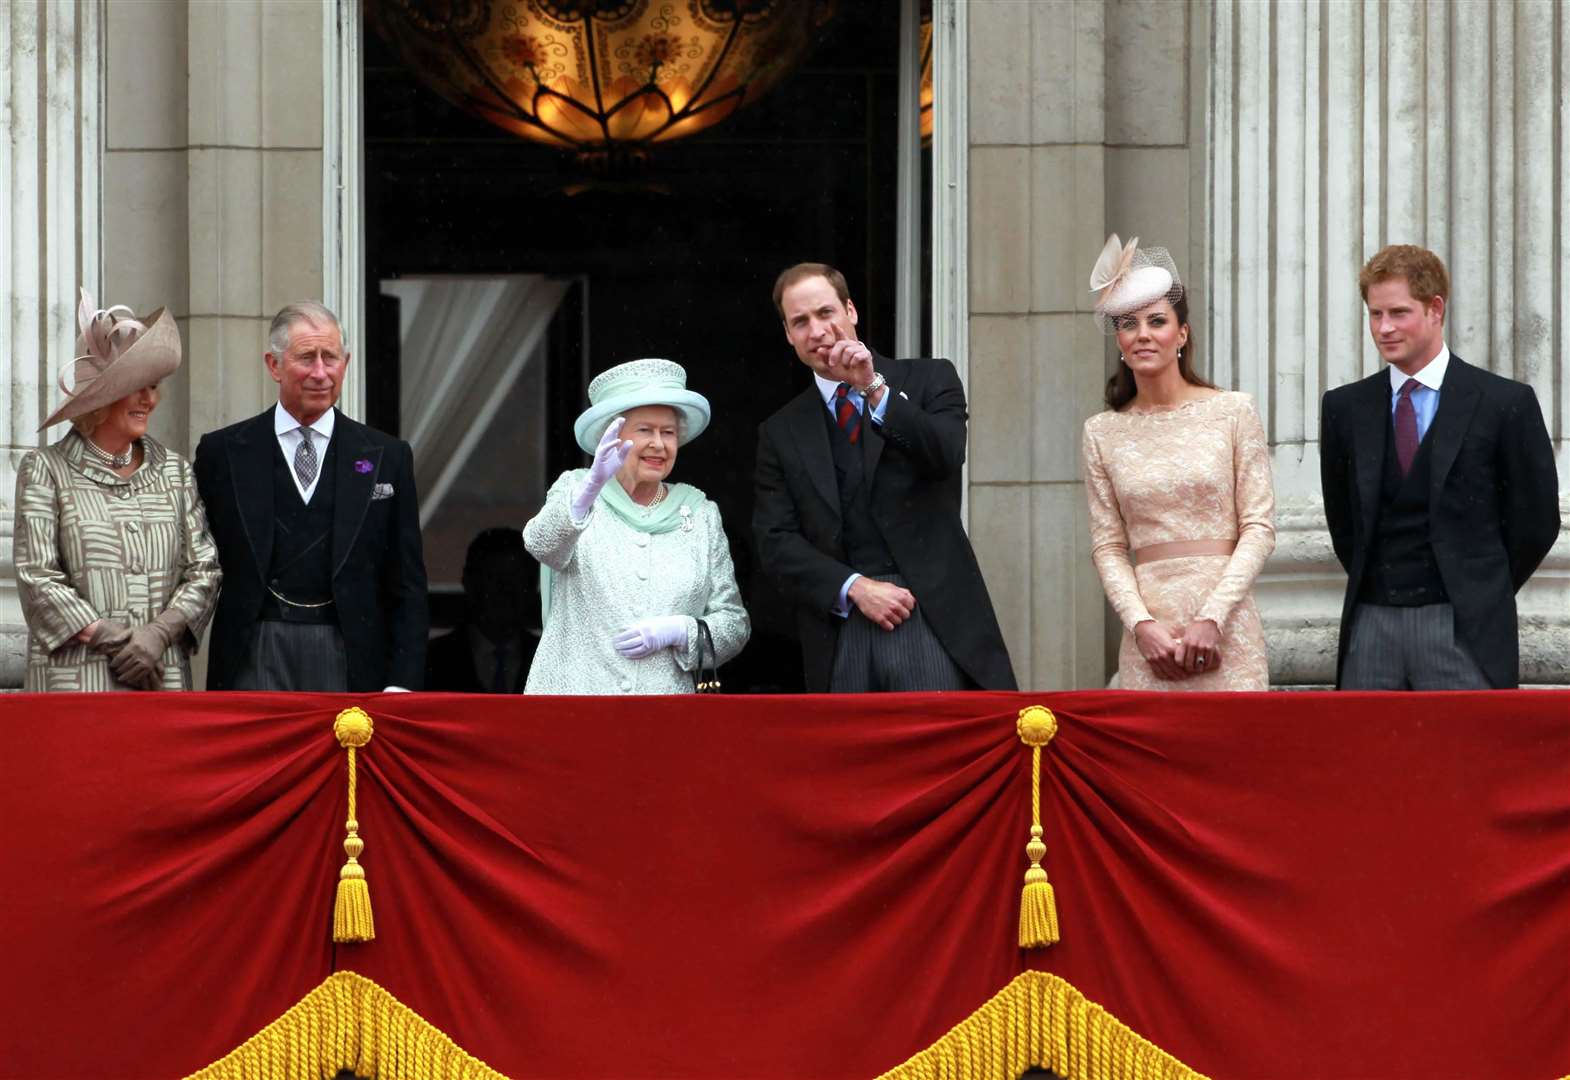 The Duchess of Cornwall, the Prince of Wales, the Queen, the Cambridges and Prince Harry on the balcony of Buckingham Palace during the Diamond Jubilee (David Jones/PA)